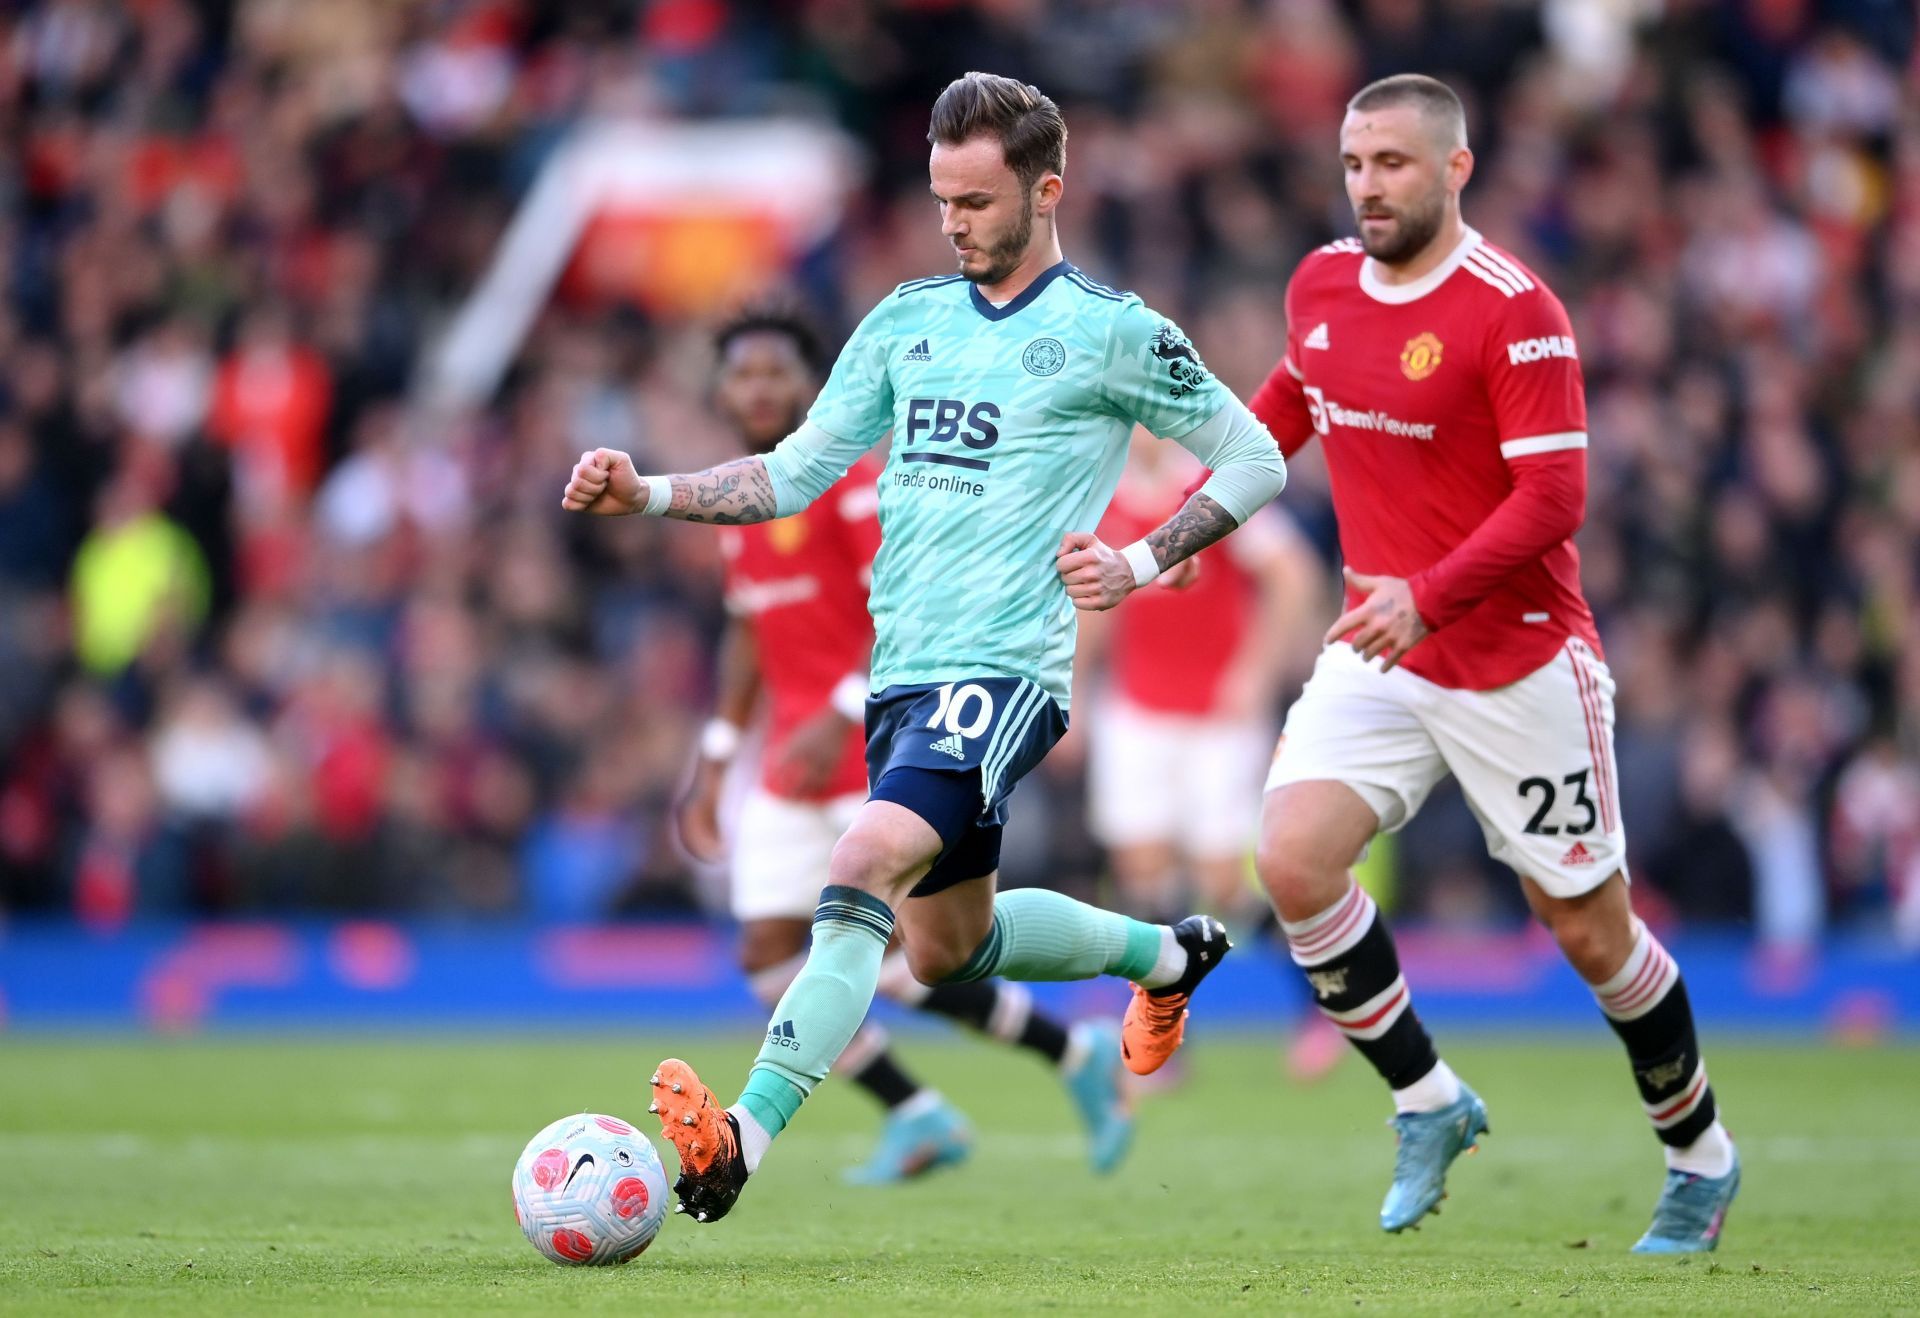 James Maddison has admirers at the Emirates.